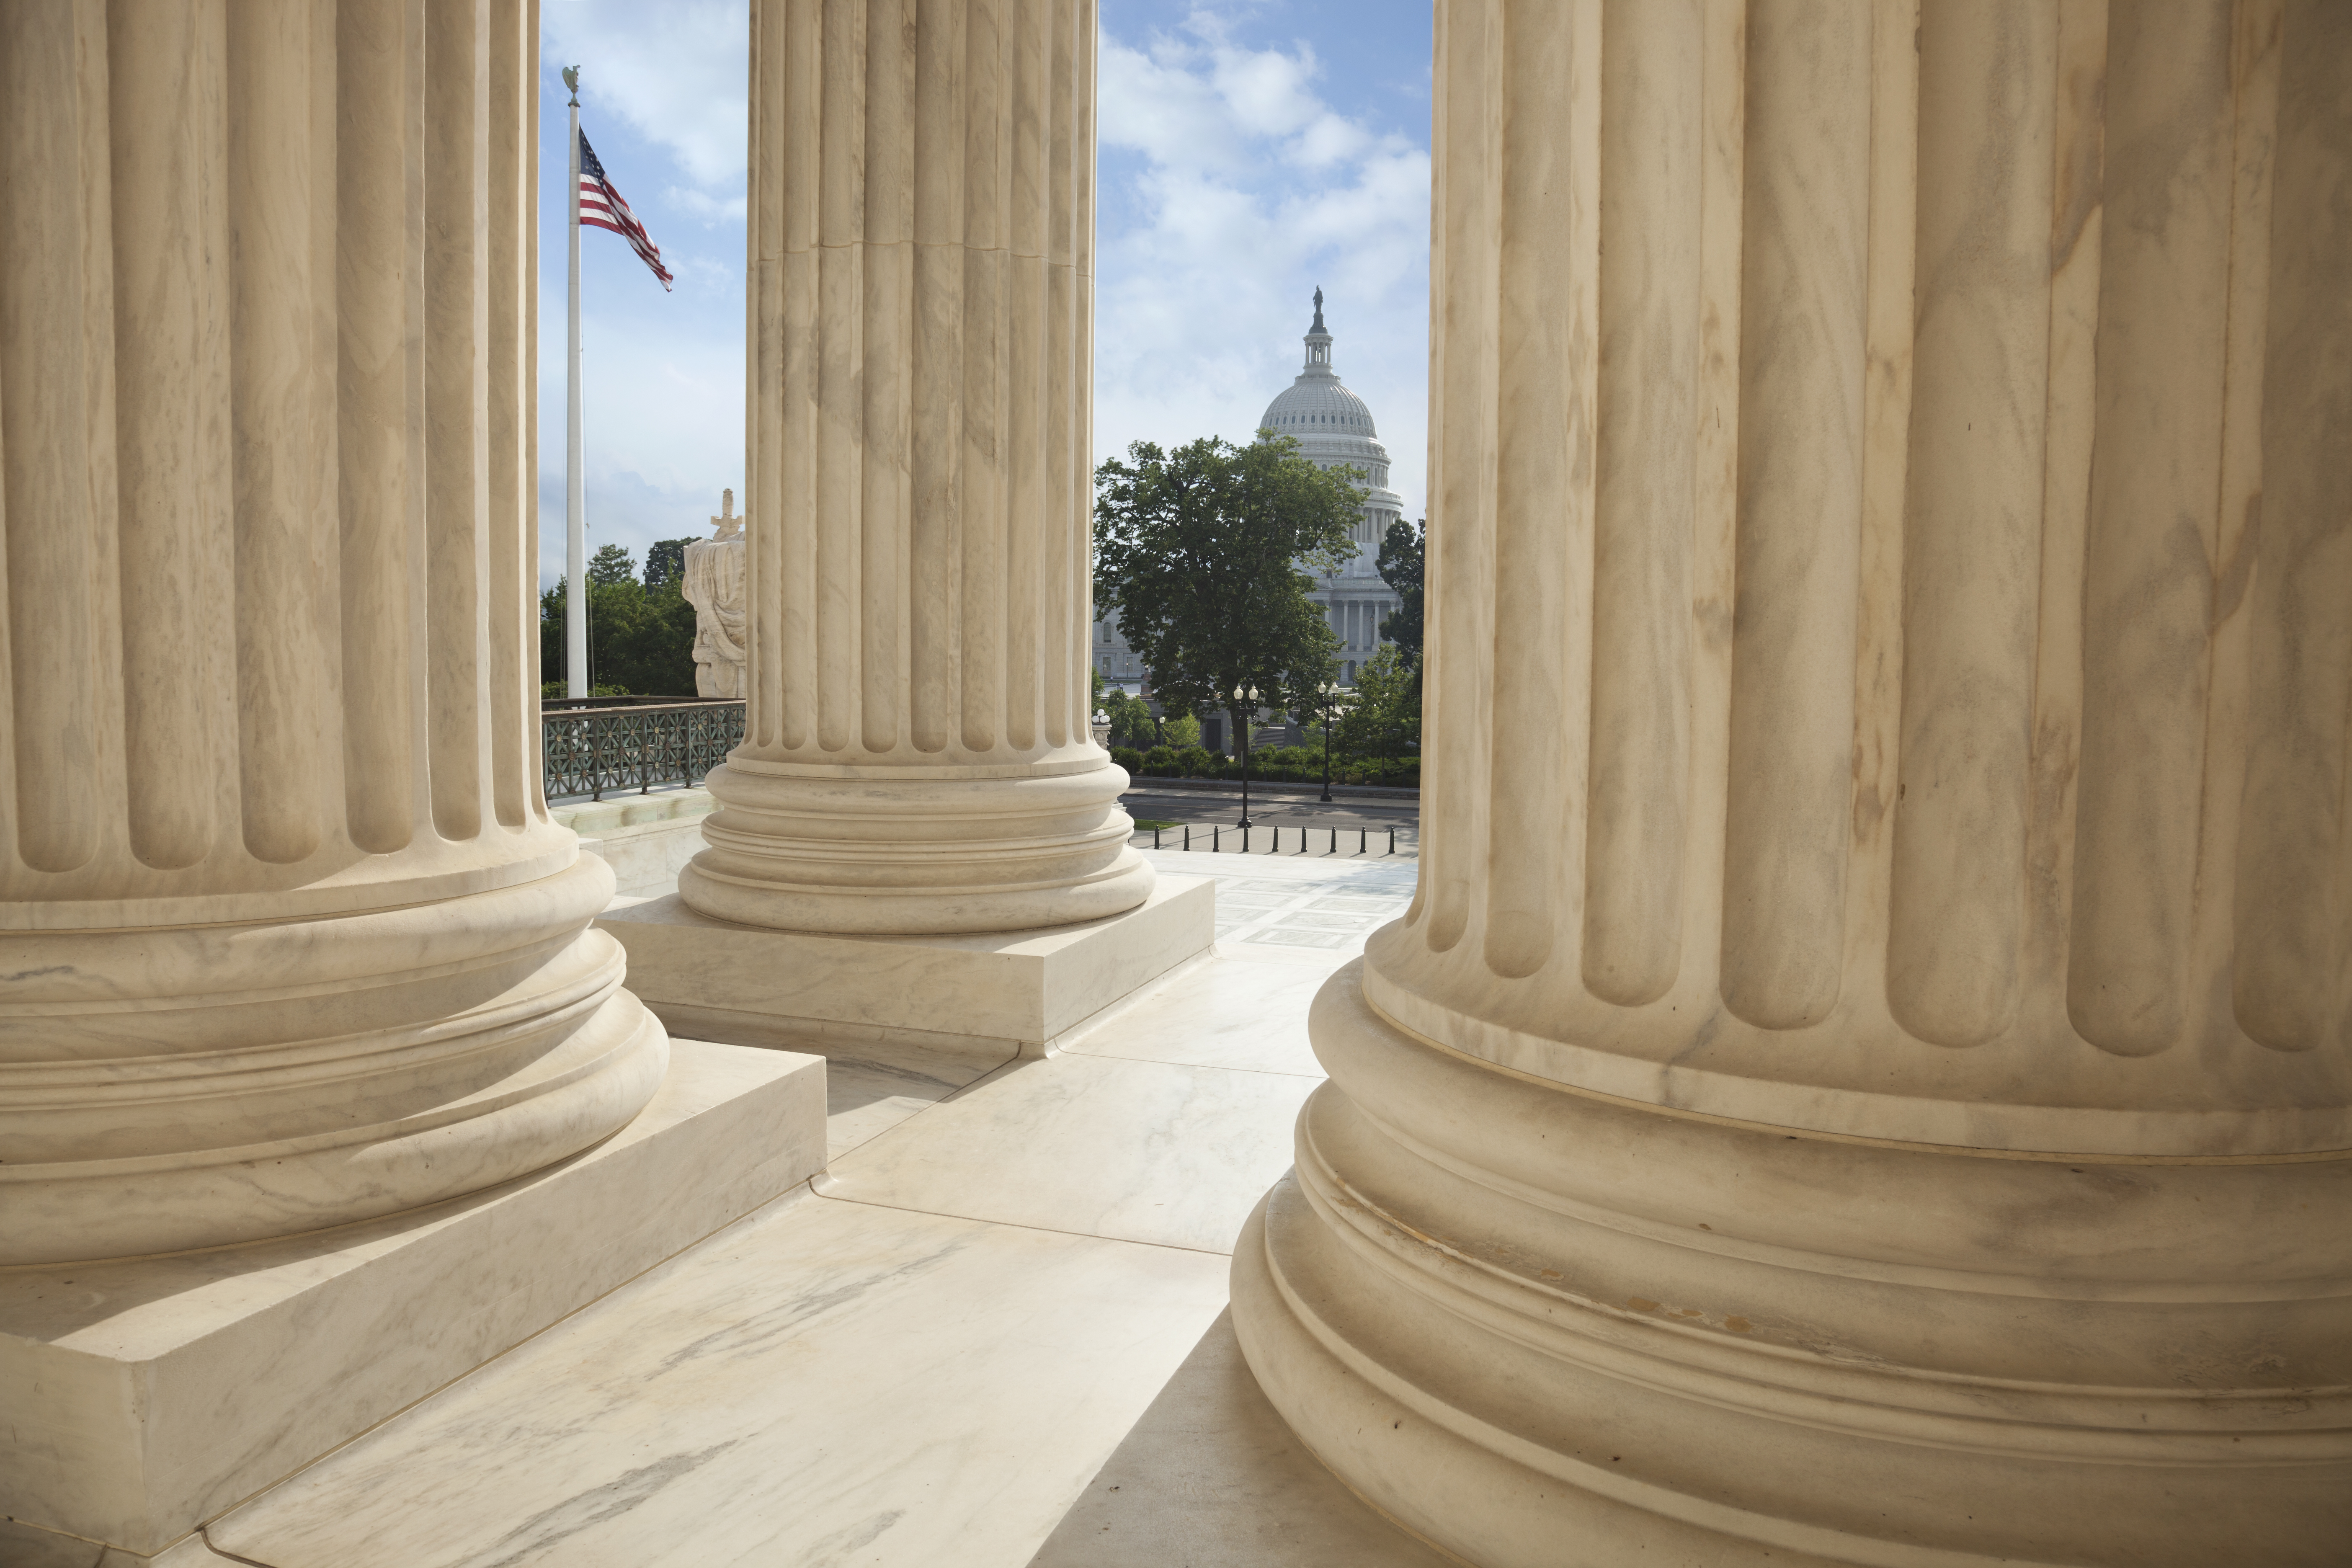 Supreme Court columns with American flag and US Capitol